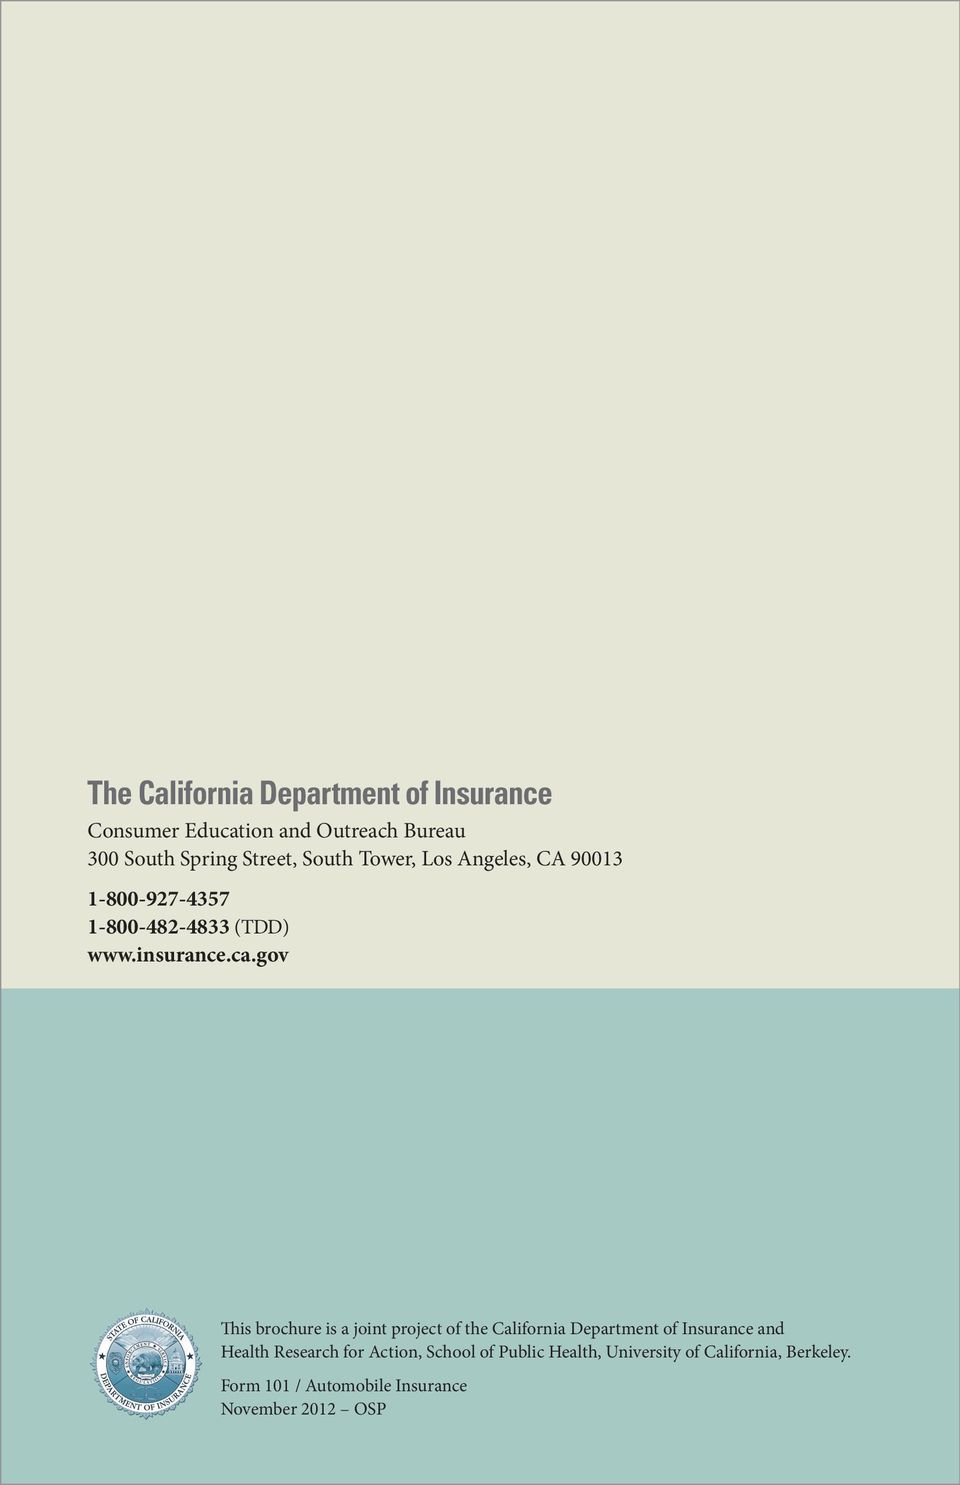 gov This brochure is a joint project of the California Department of Insurance and Health Research for